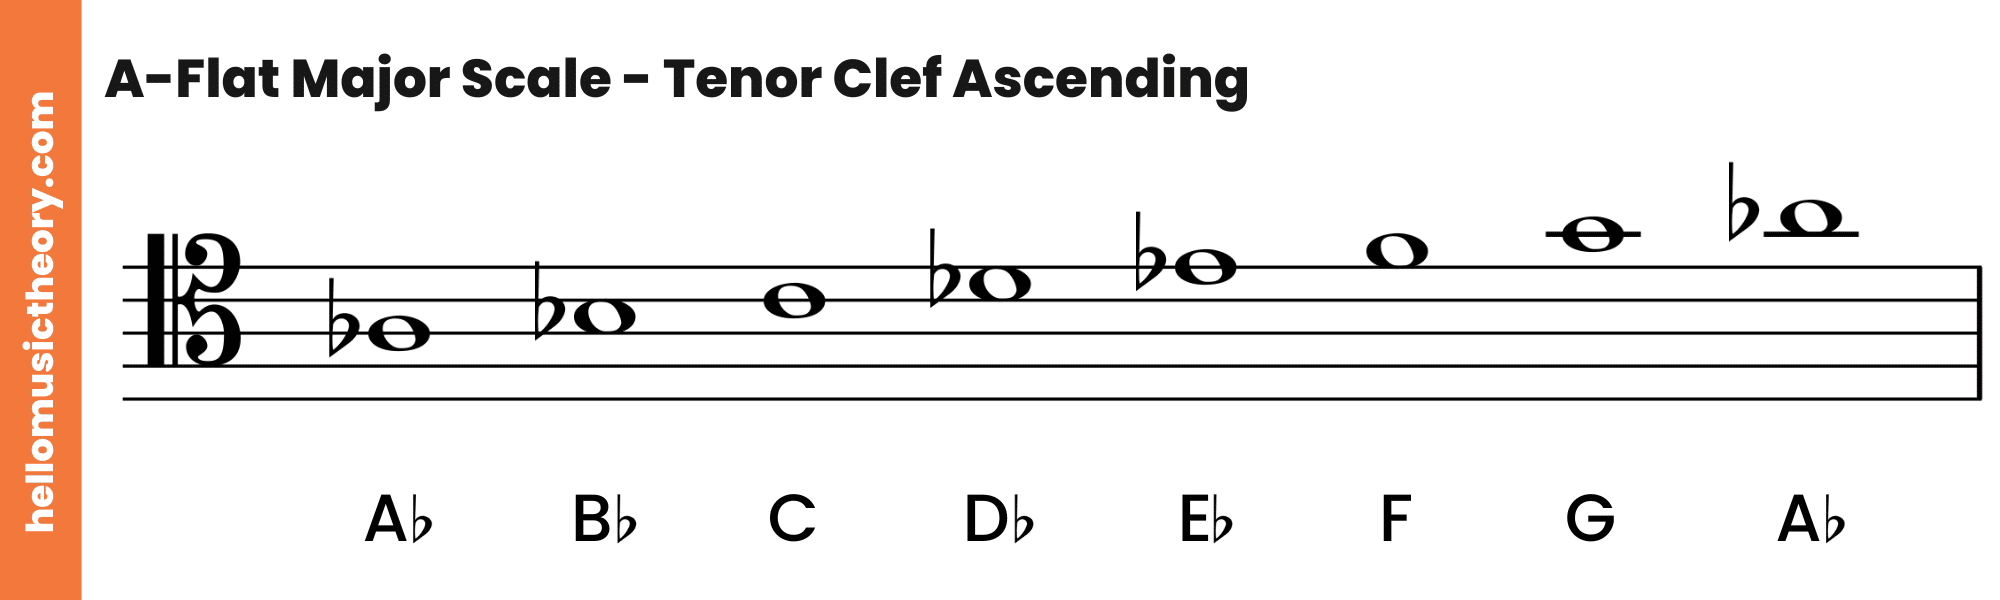 A-Flat Major Scale Tenor Clef Ascending